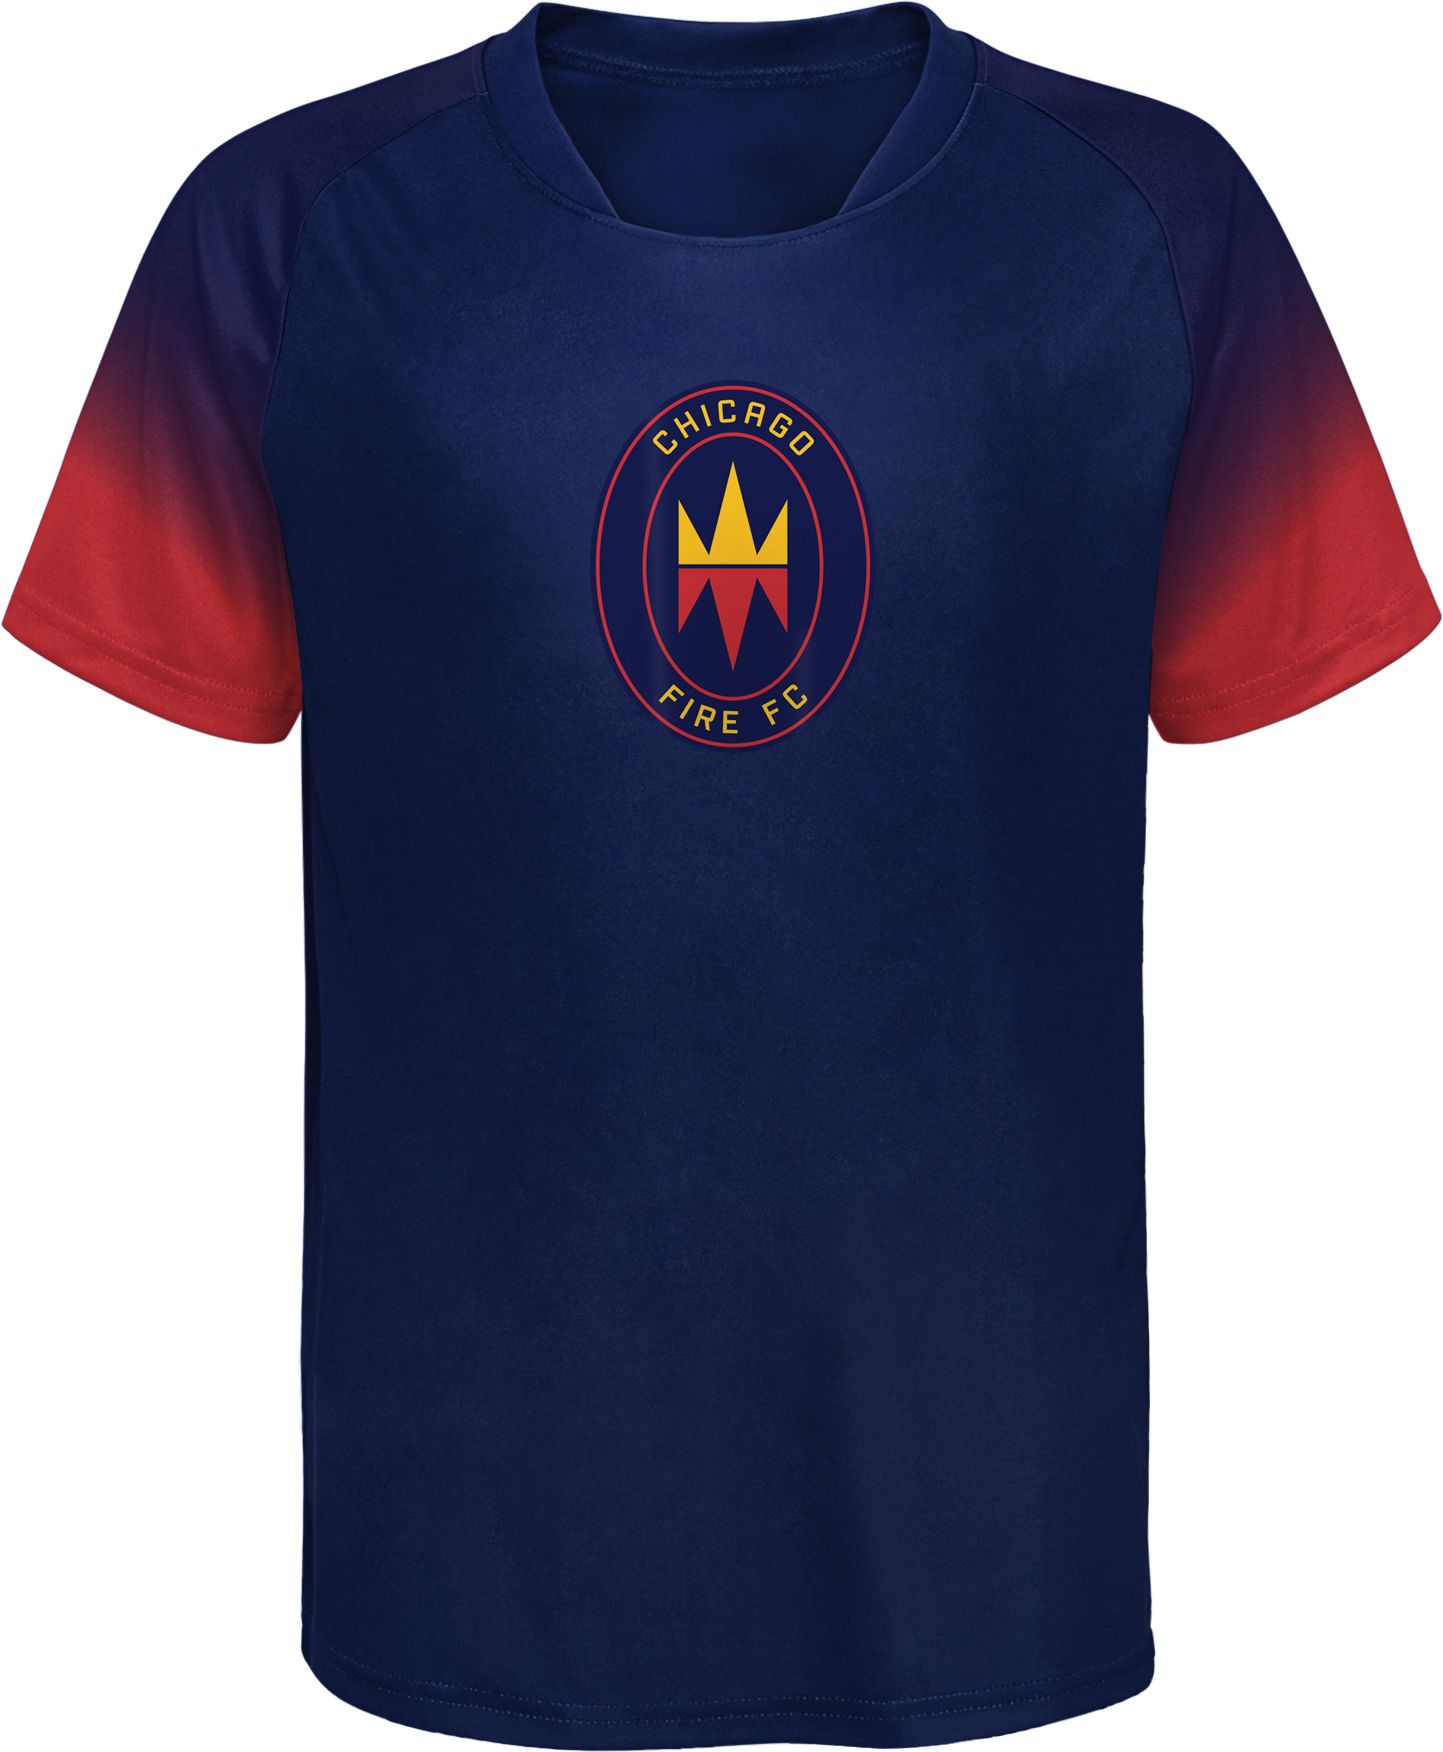 chicago fire youth jersey